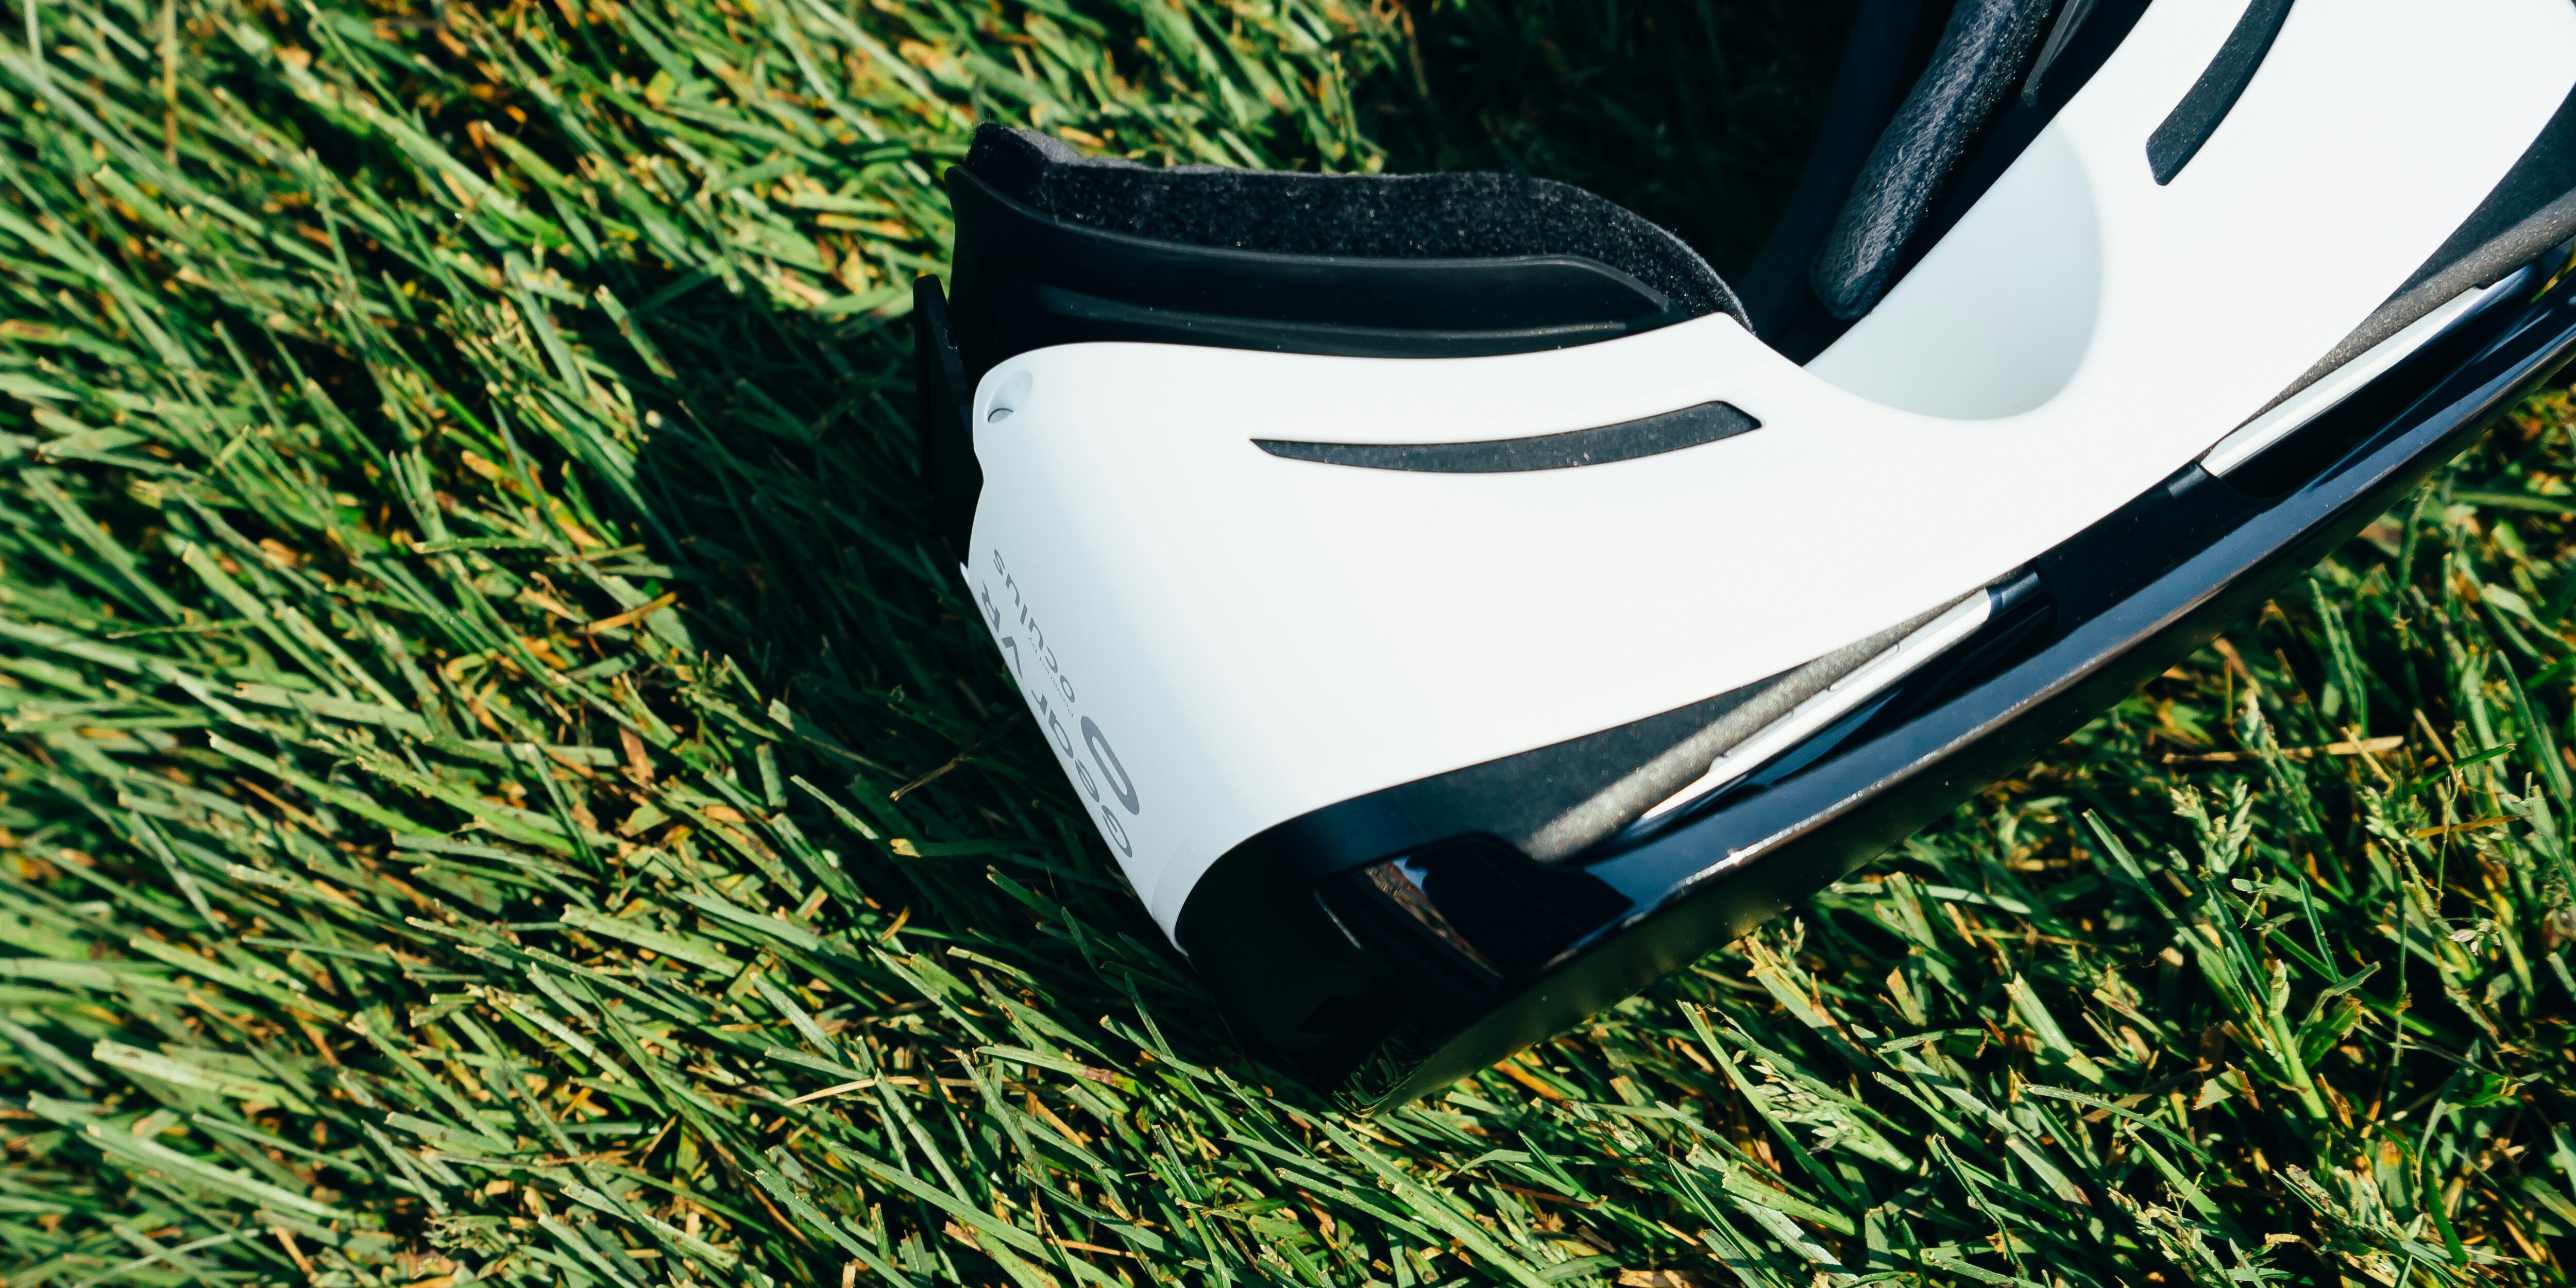 an image of VR headset against grass